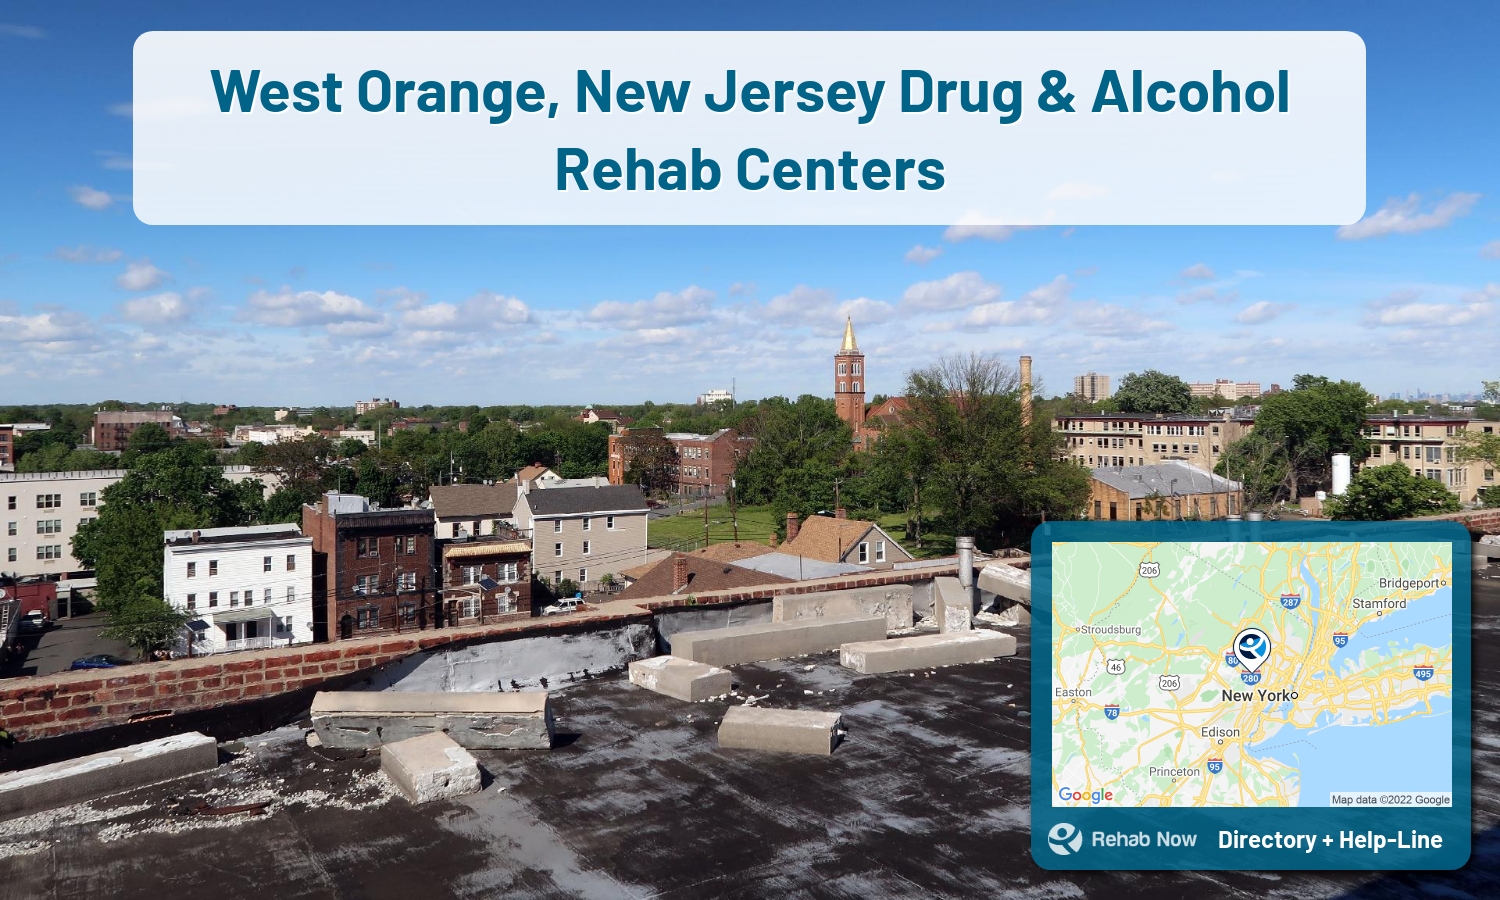 View options, availability, treatment methods, and more, for drug rehab and alcohol treatment in West Orange, New Jersey